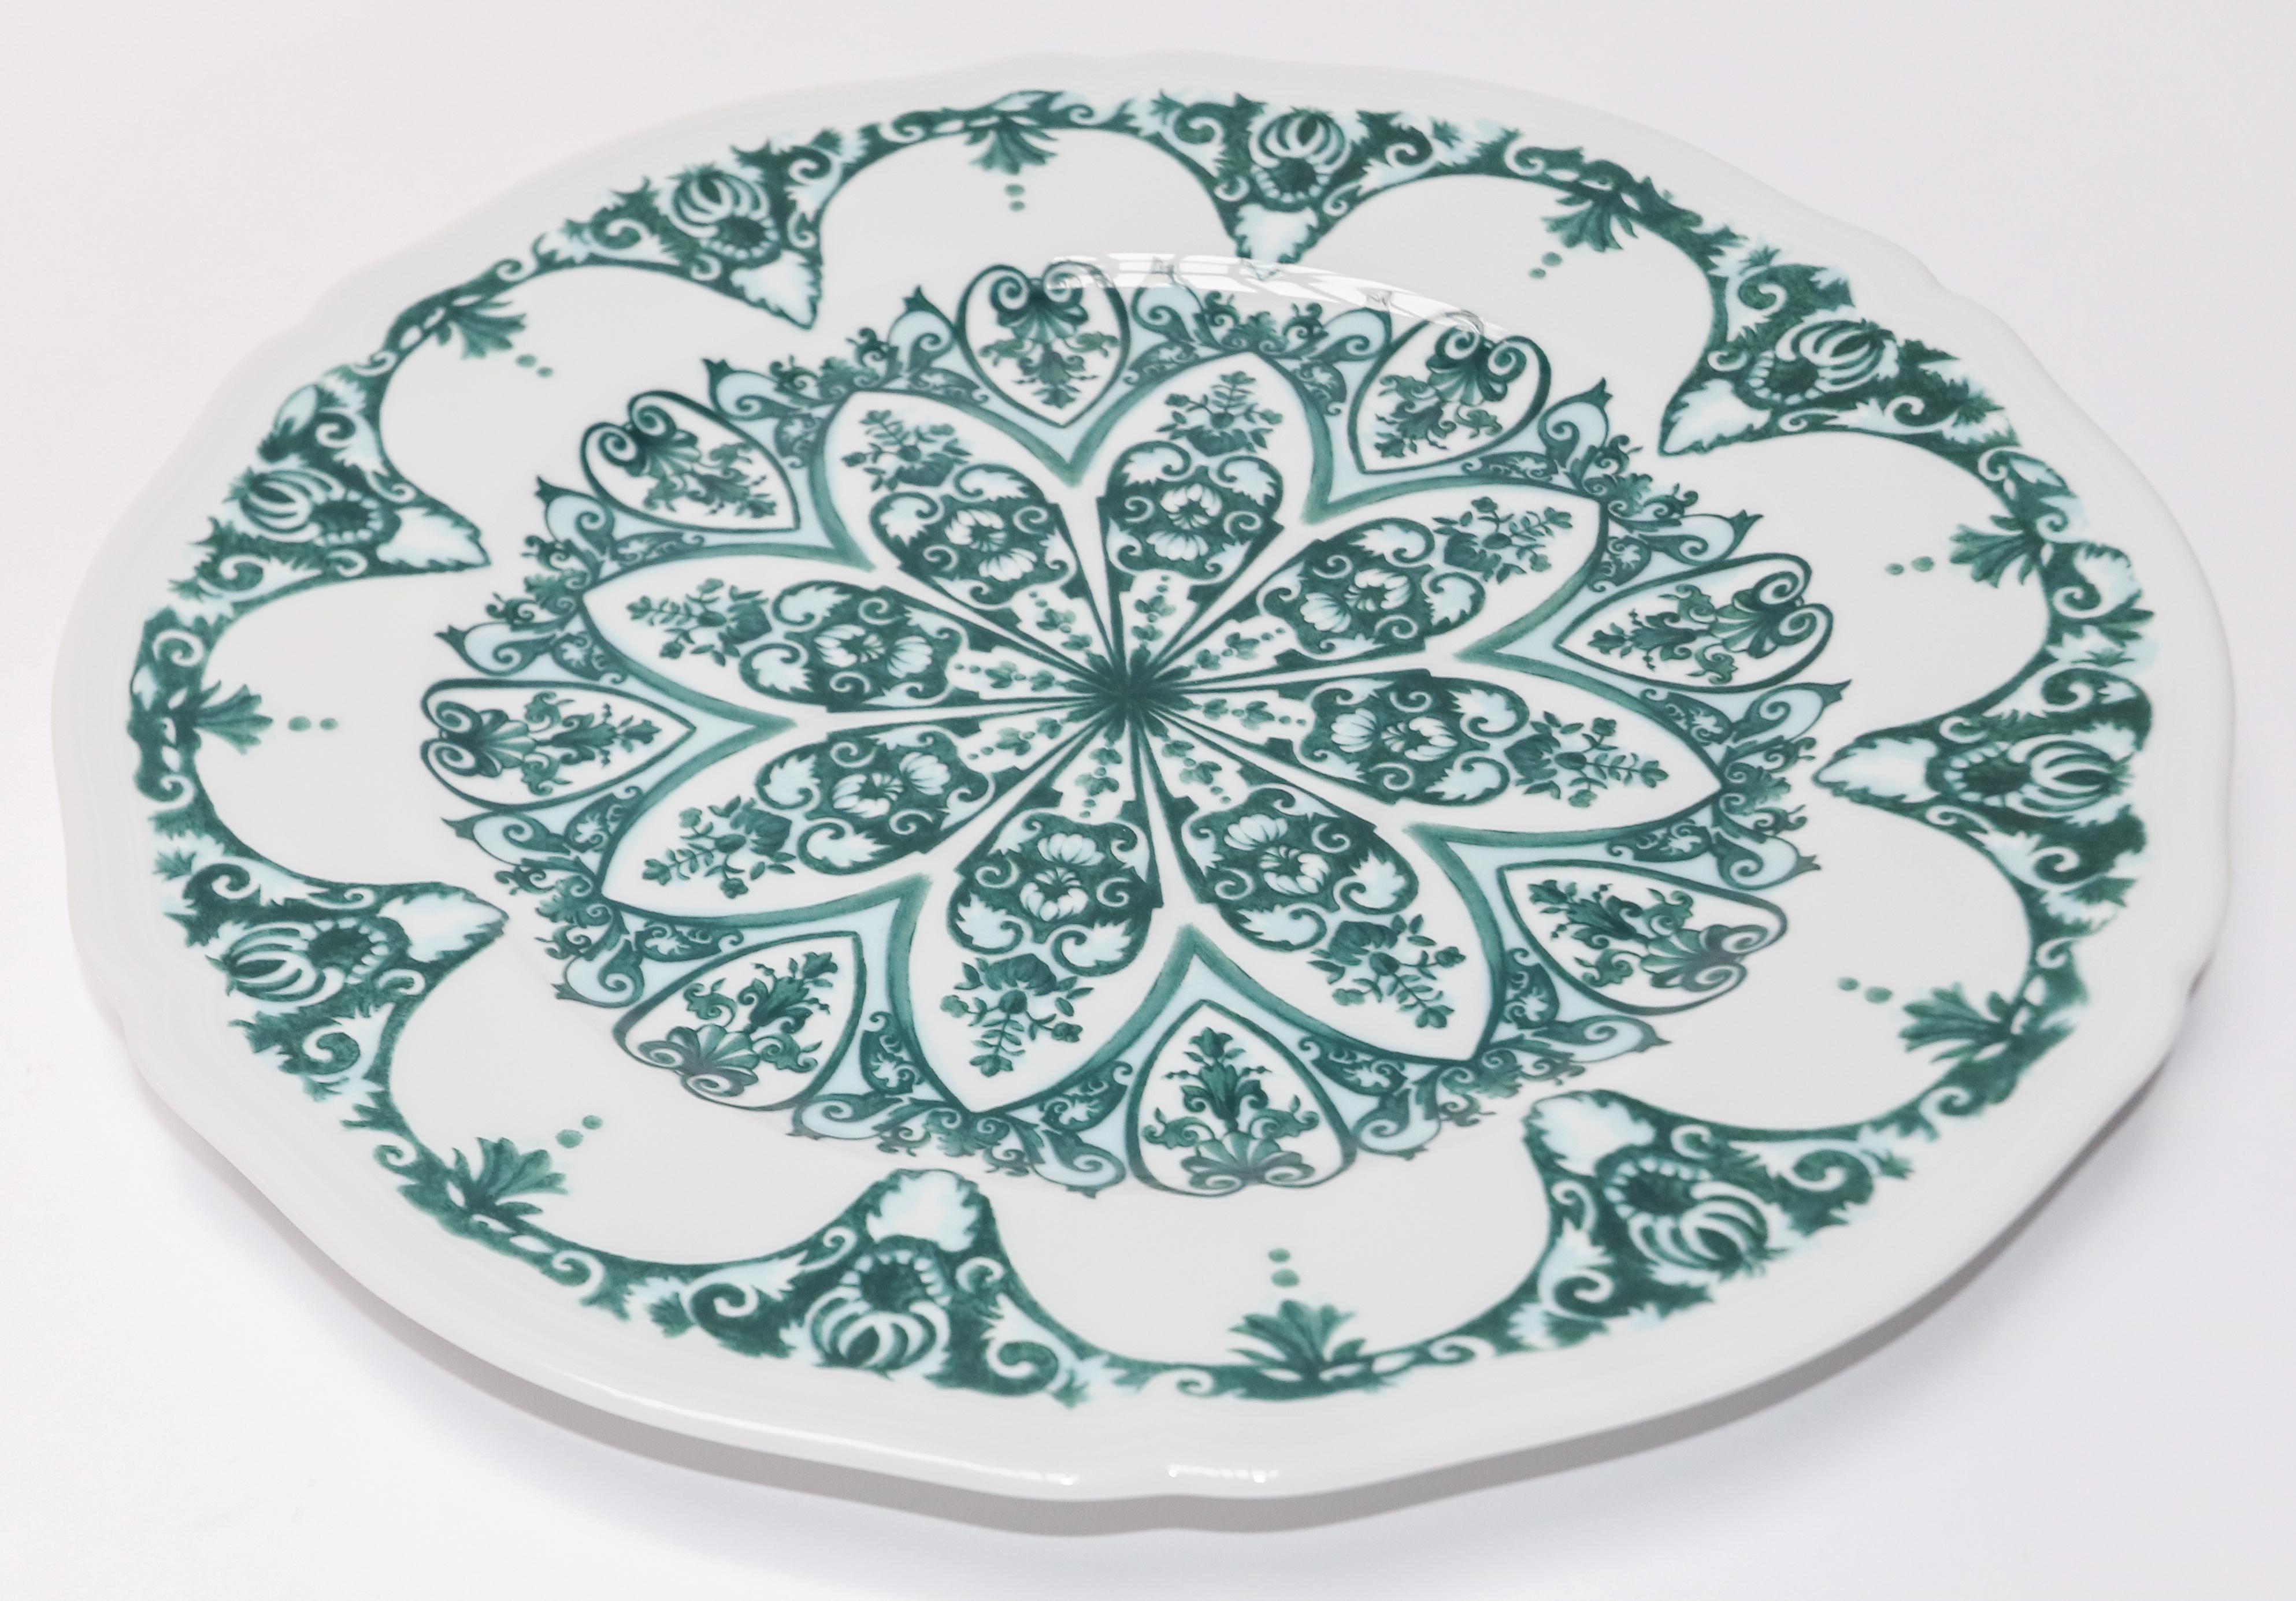 Richard Ginori babele verde green charger plate in the Antico Doccia shape 31cm in diameter. Can be order in various colors. Green no longer available in this size.